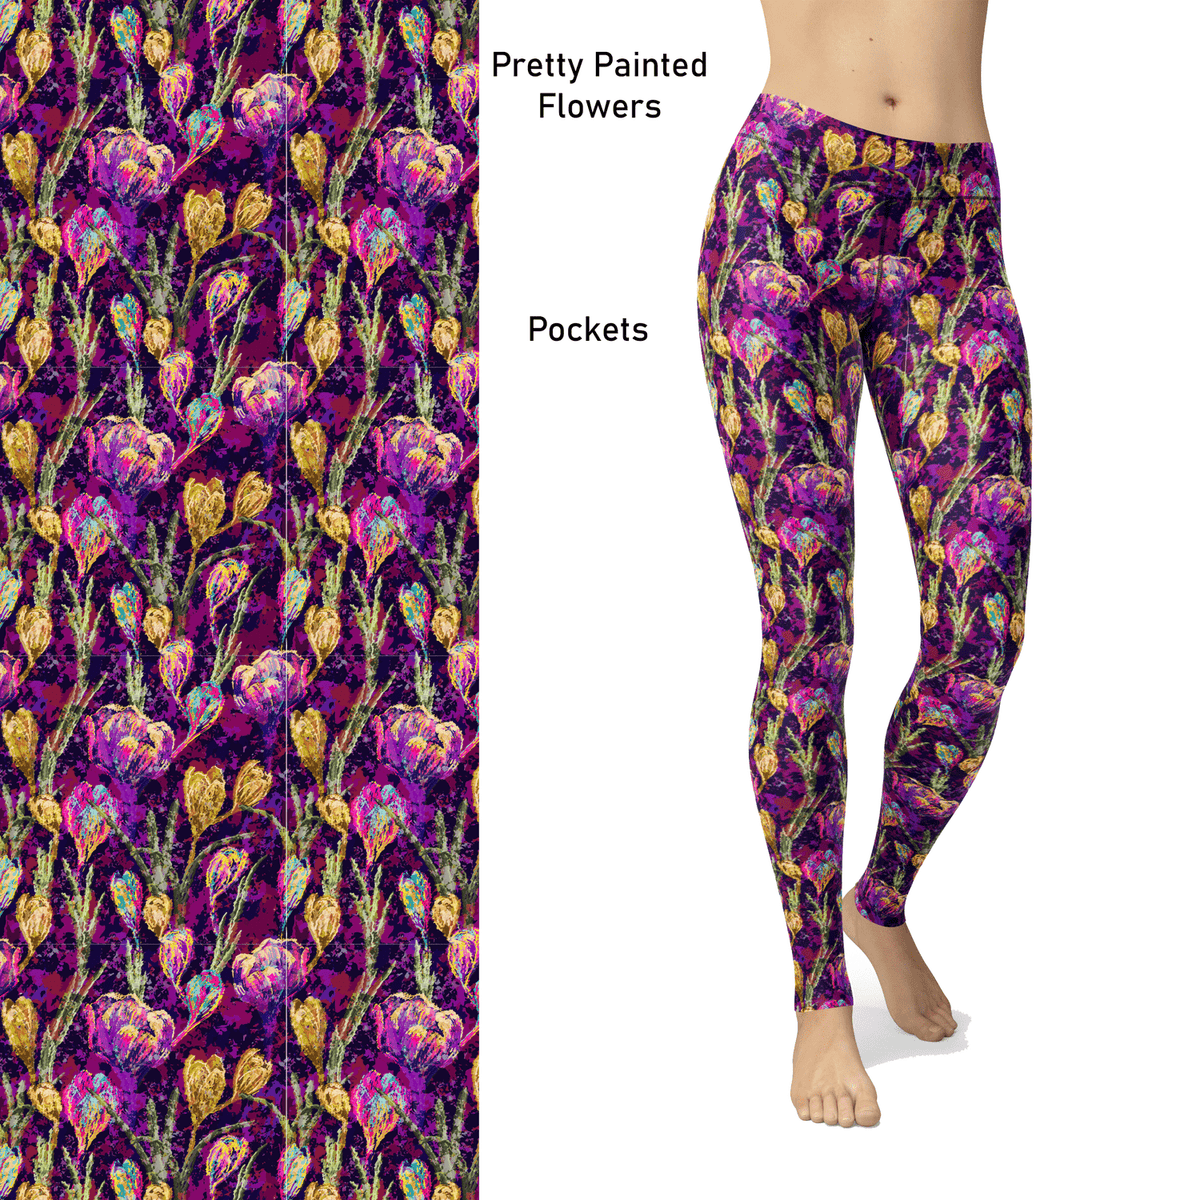 Pretty Painted Flowers Leggings with Pockets